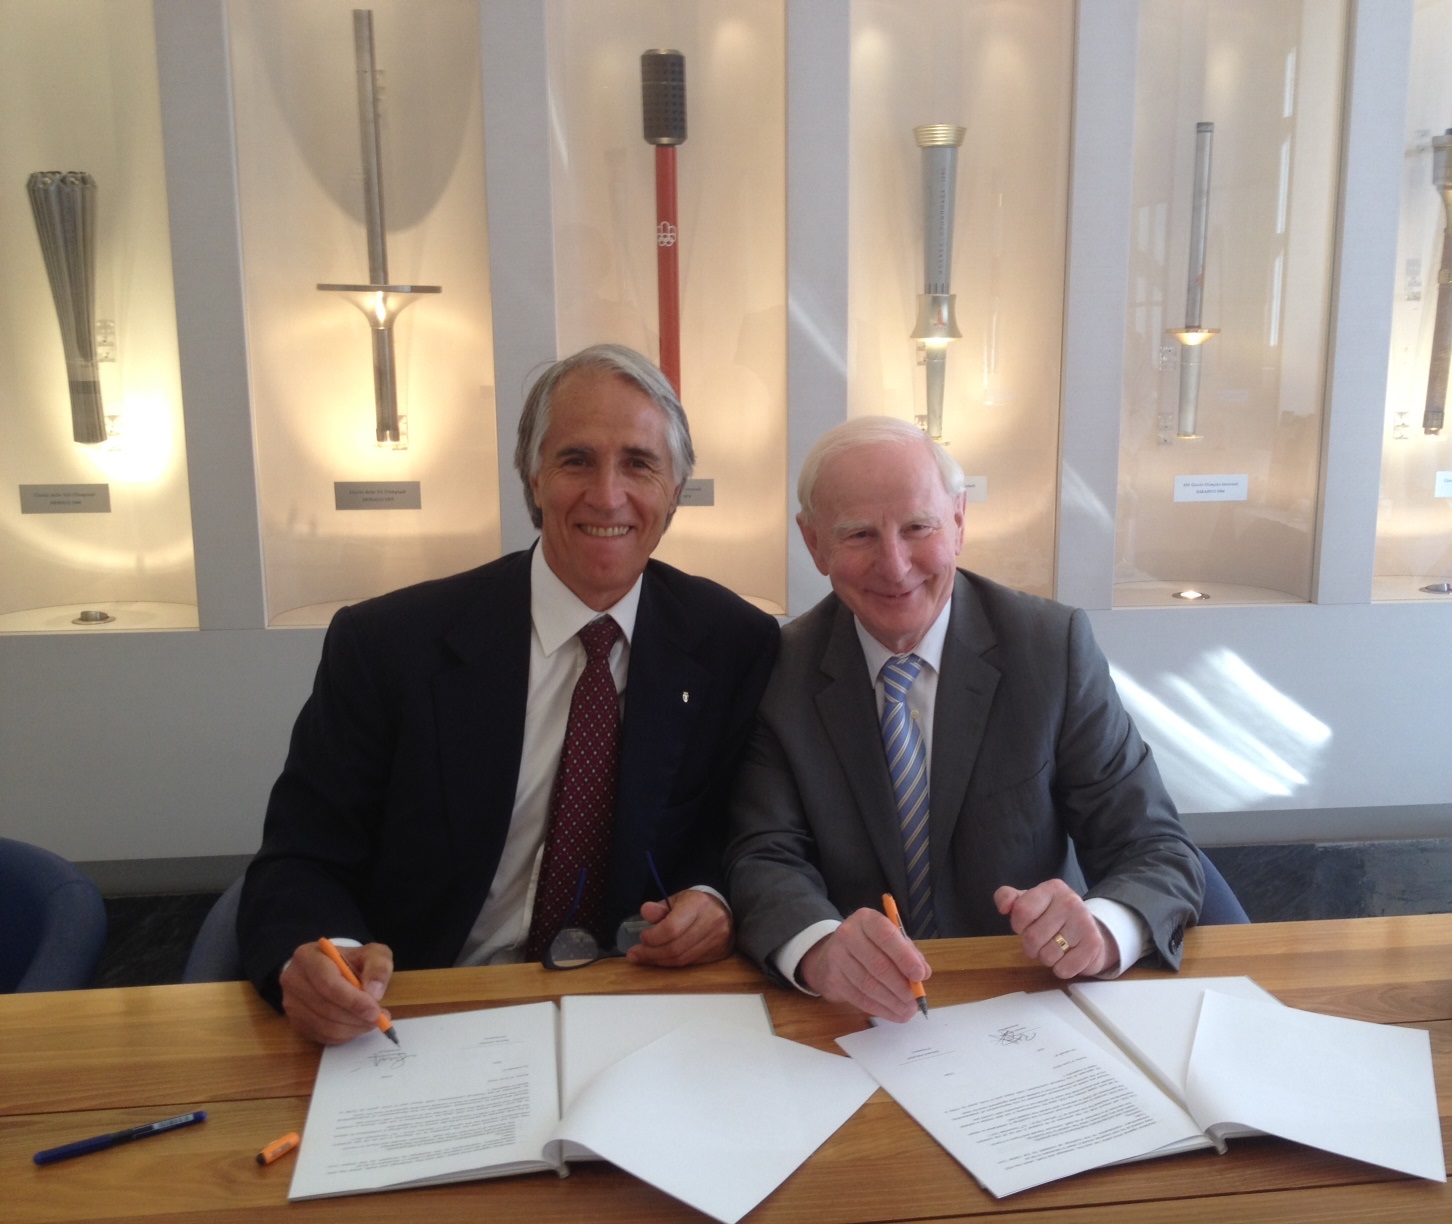 President of CONI Giovanni Malago & President of EOC Pat Hickey sign a cooperation agreement in Rome.